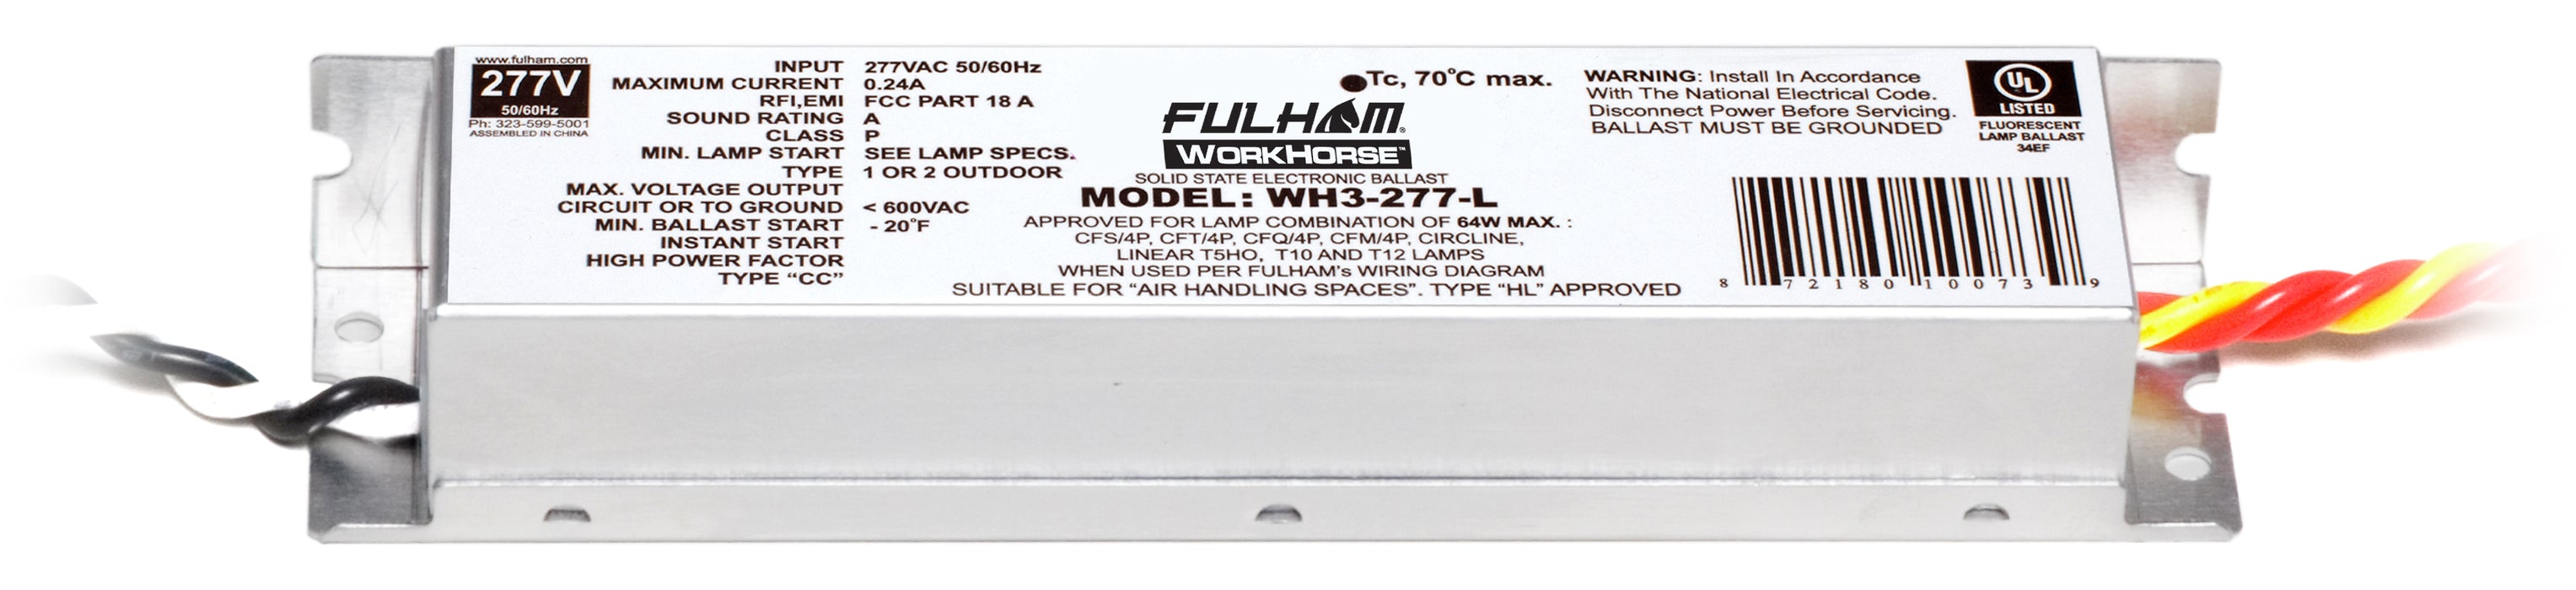 Fulham Instant Start Electronic Fluorescent Workhorse Ballast For (1-3) 64W Maximum Lamps Run At 277V (WH3-277-L)